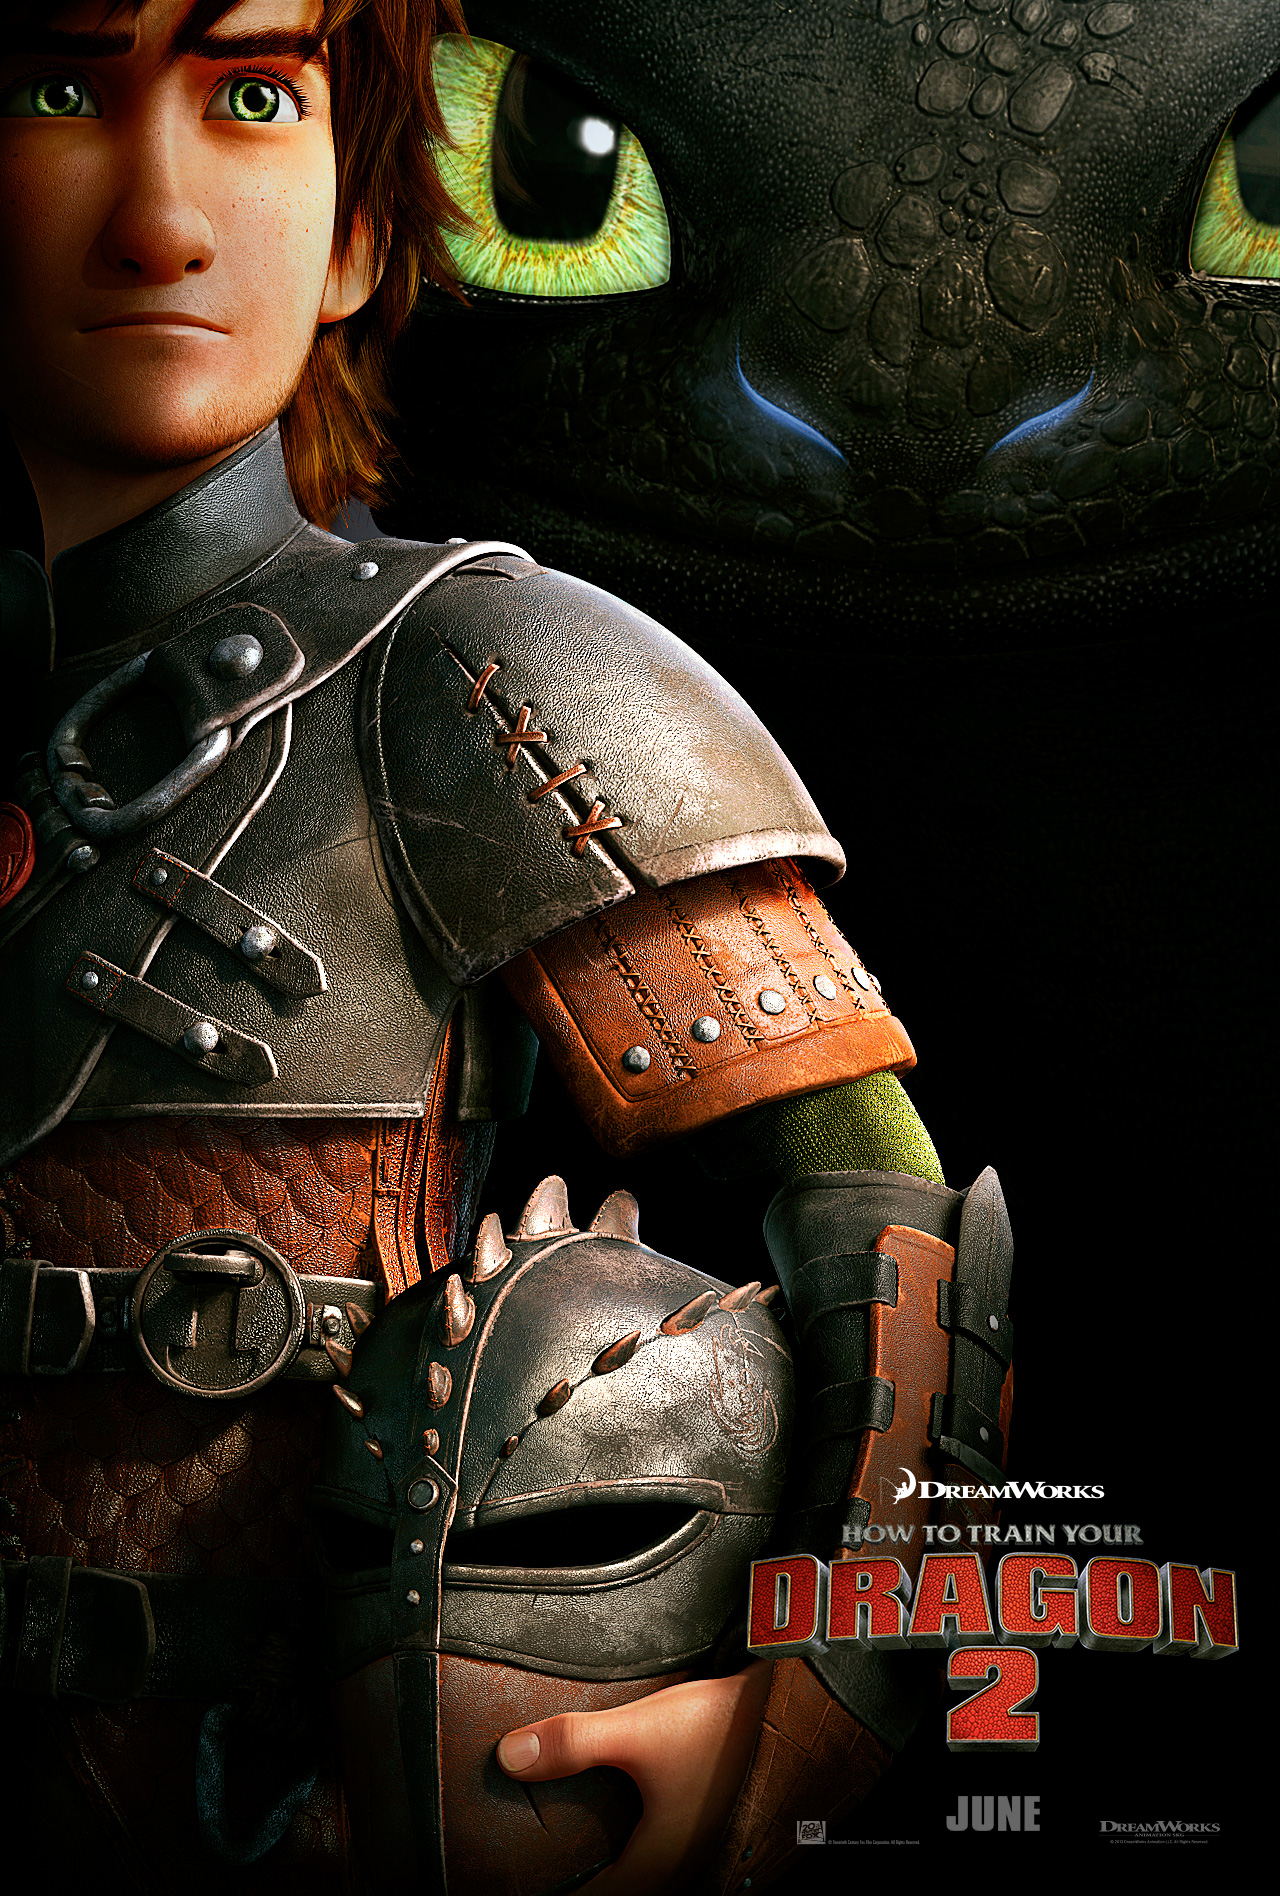 Learn How to Train Your Dragon 2 with New Official Poster